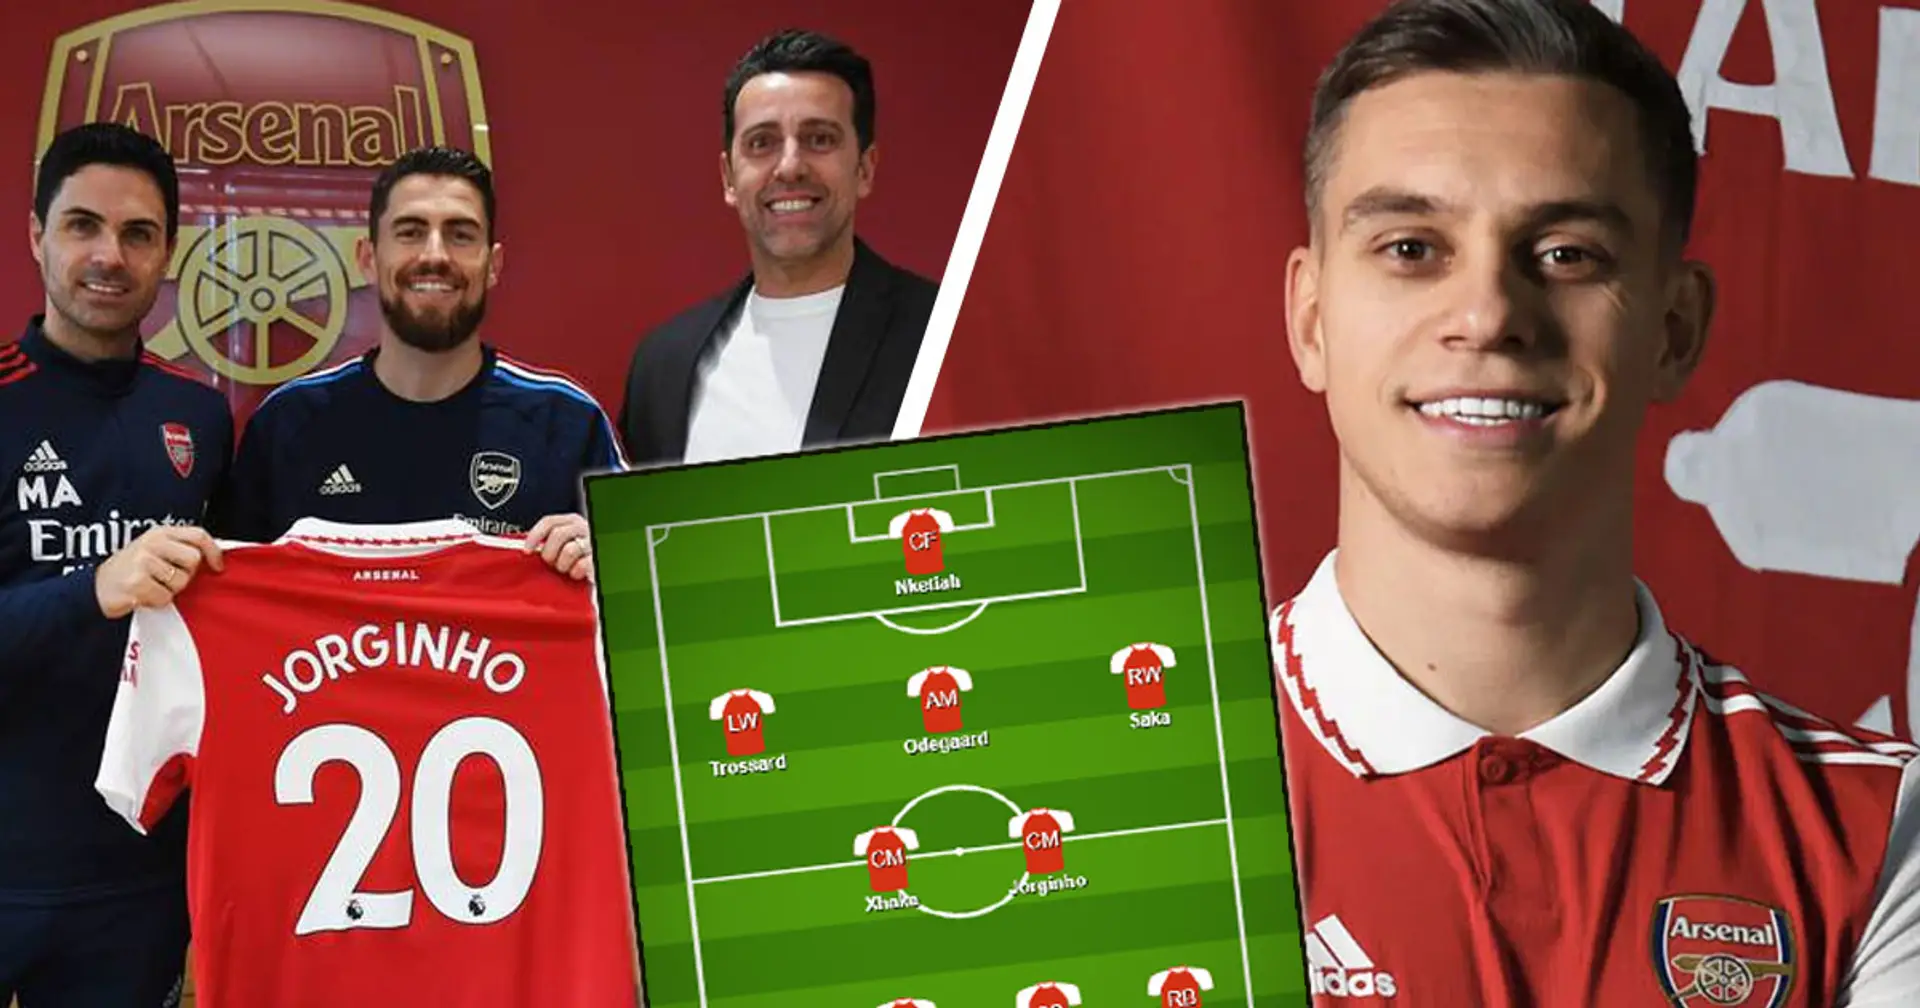 Two ways Arsenal can line up with all January signings - shown in pics